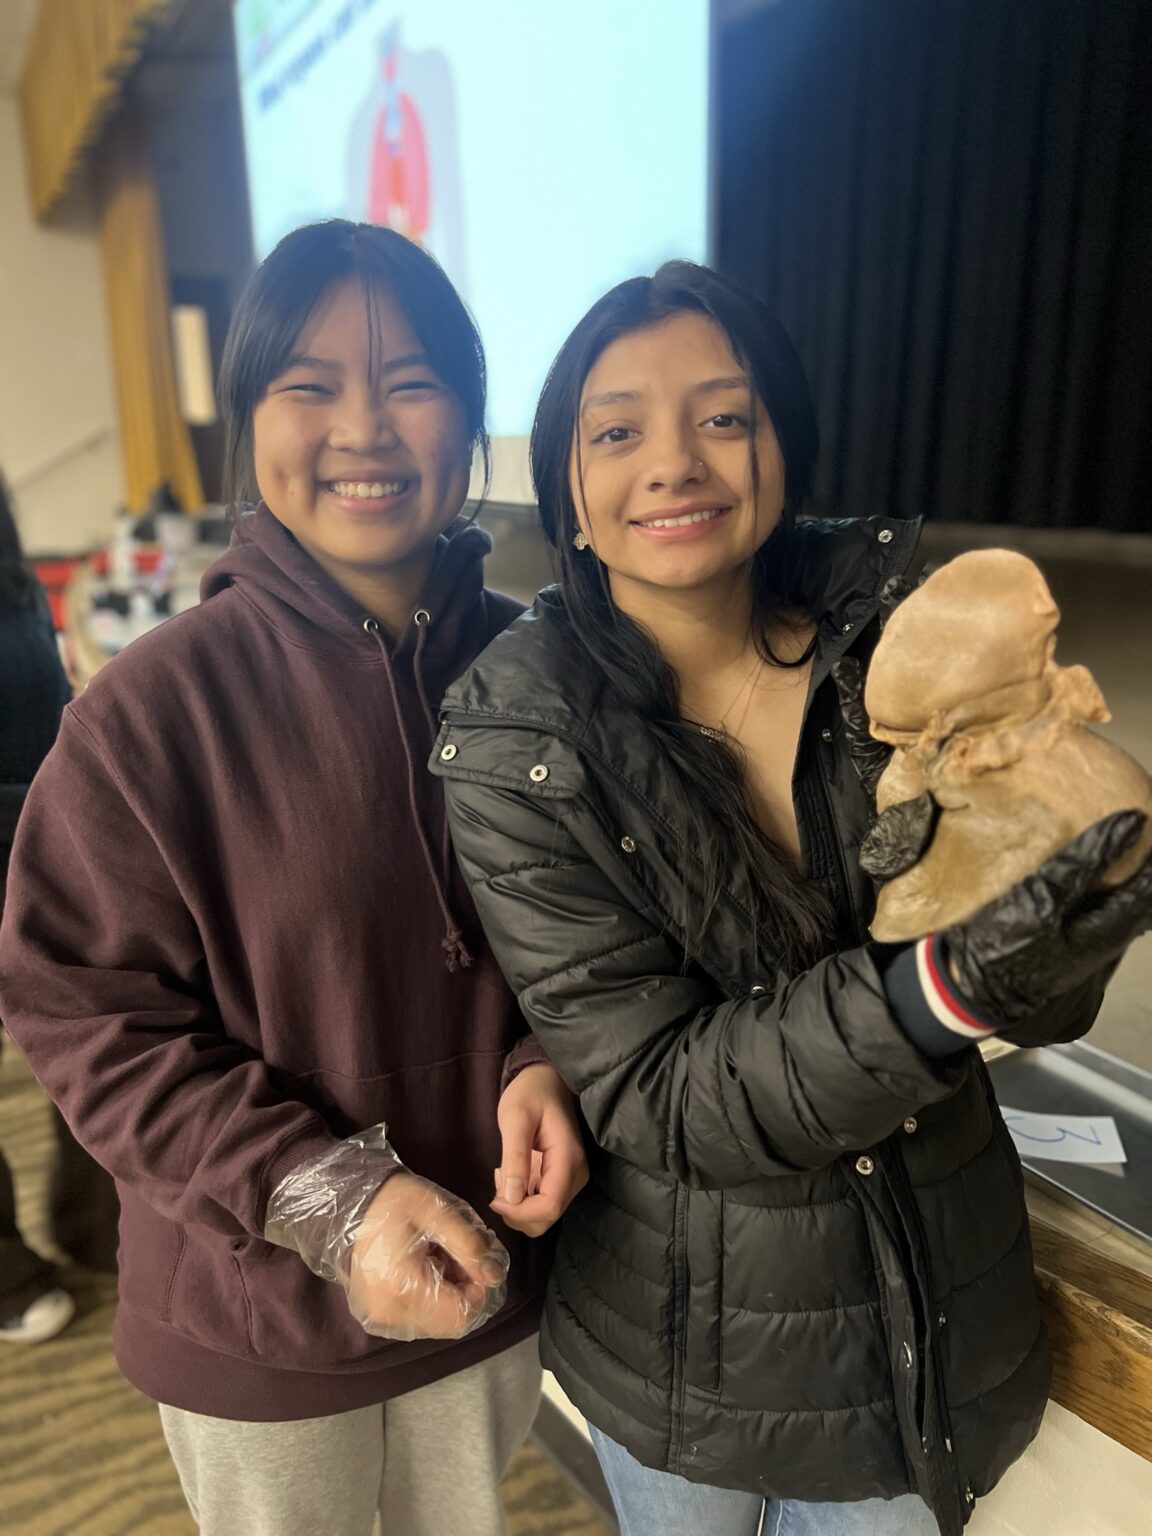 High school students holding plastinated organs as part of GIft of Life's All of Us youth education program